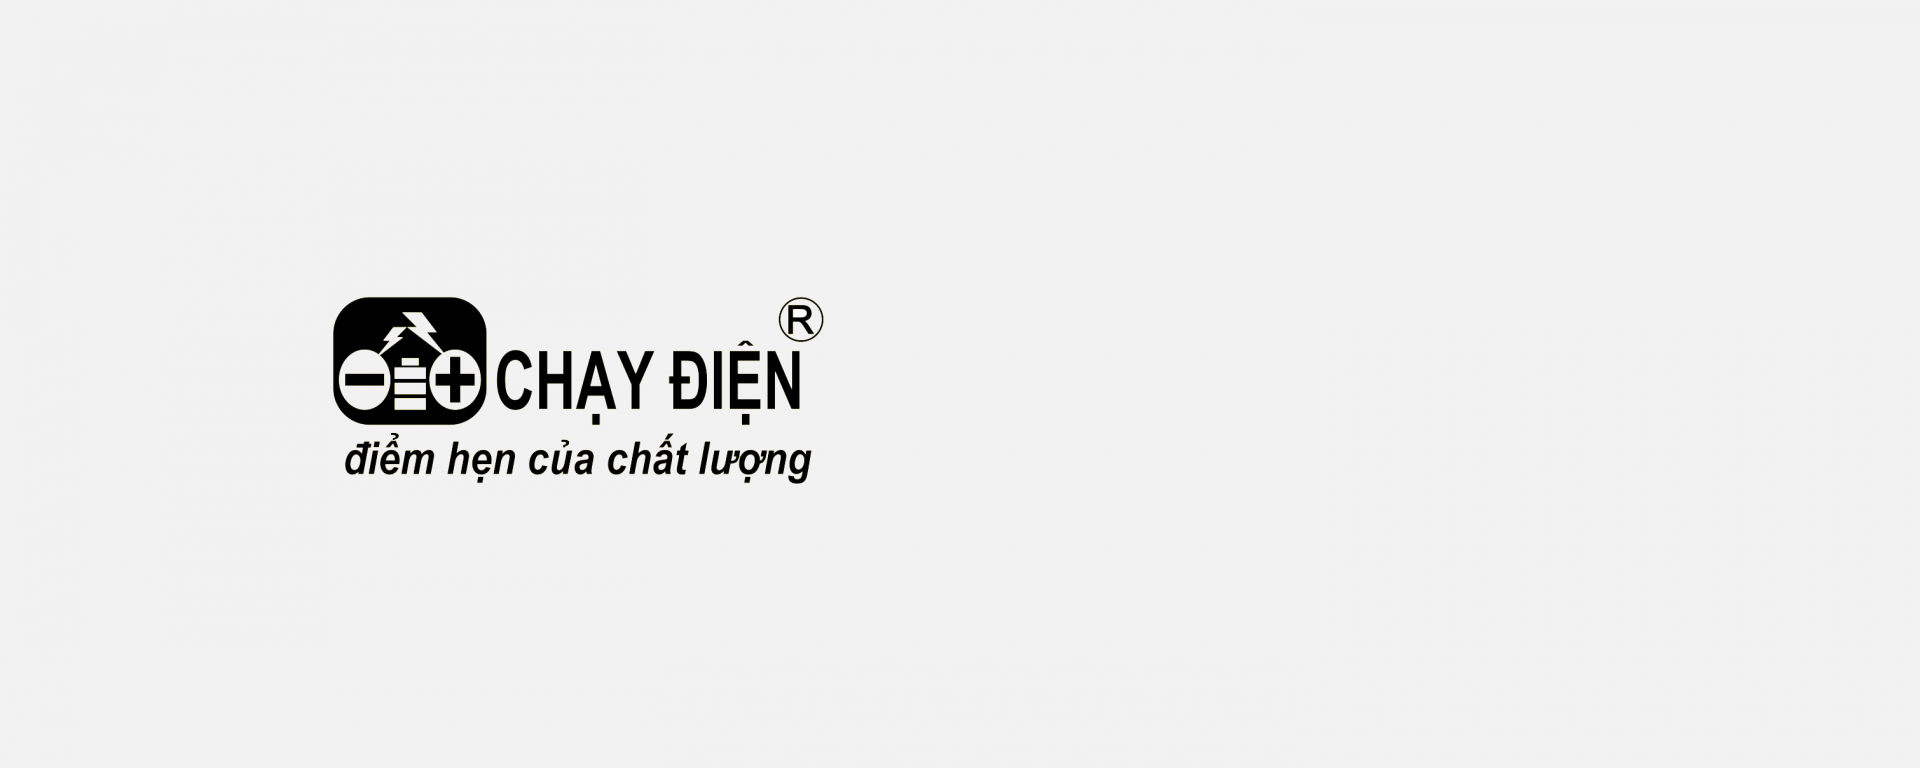 the gioi chay dien - pc